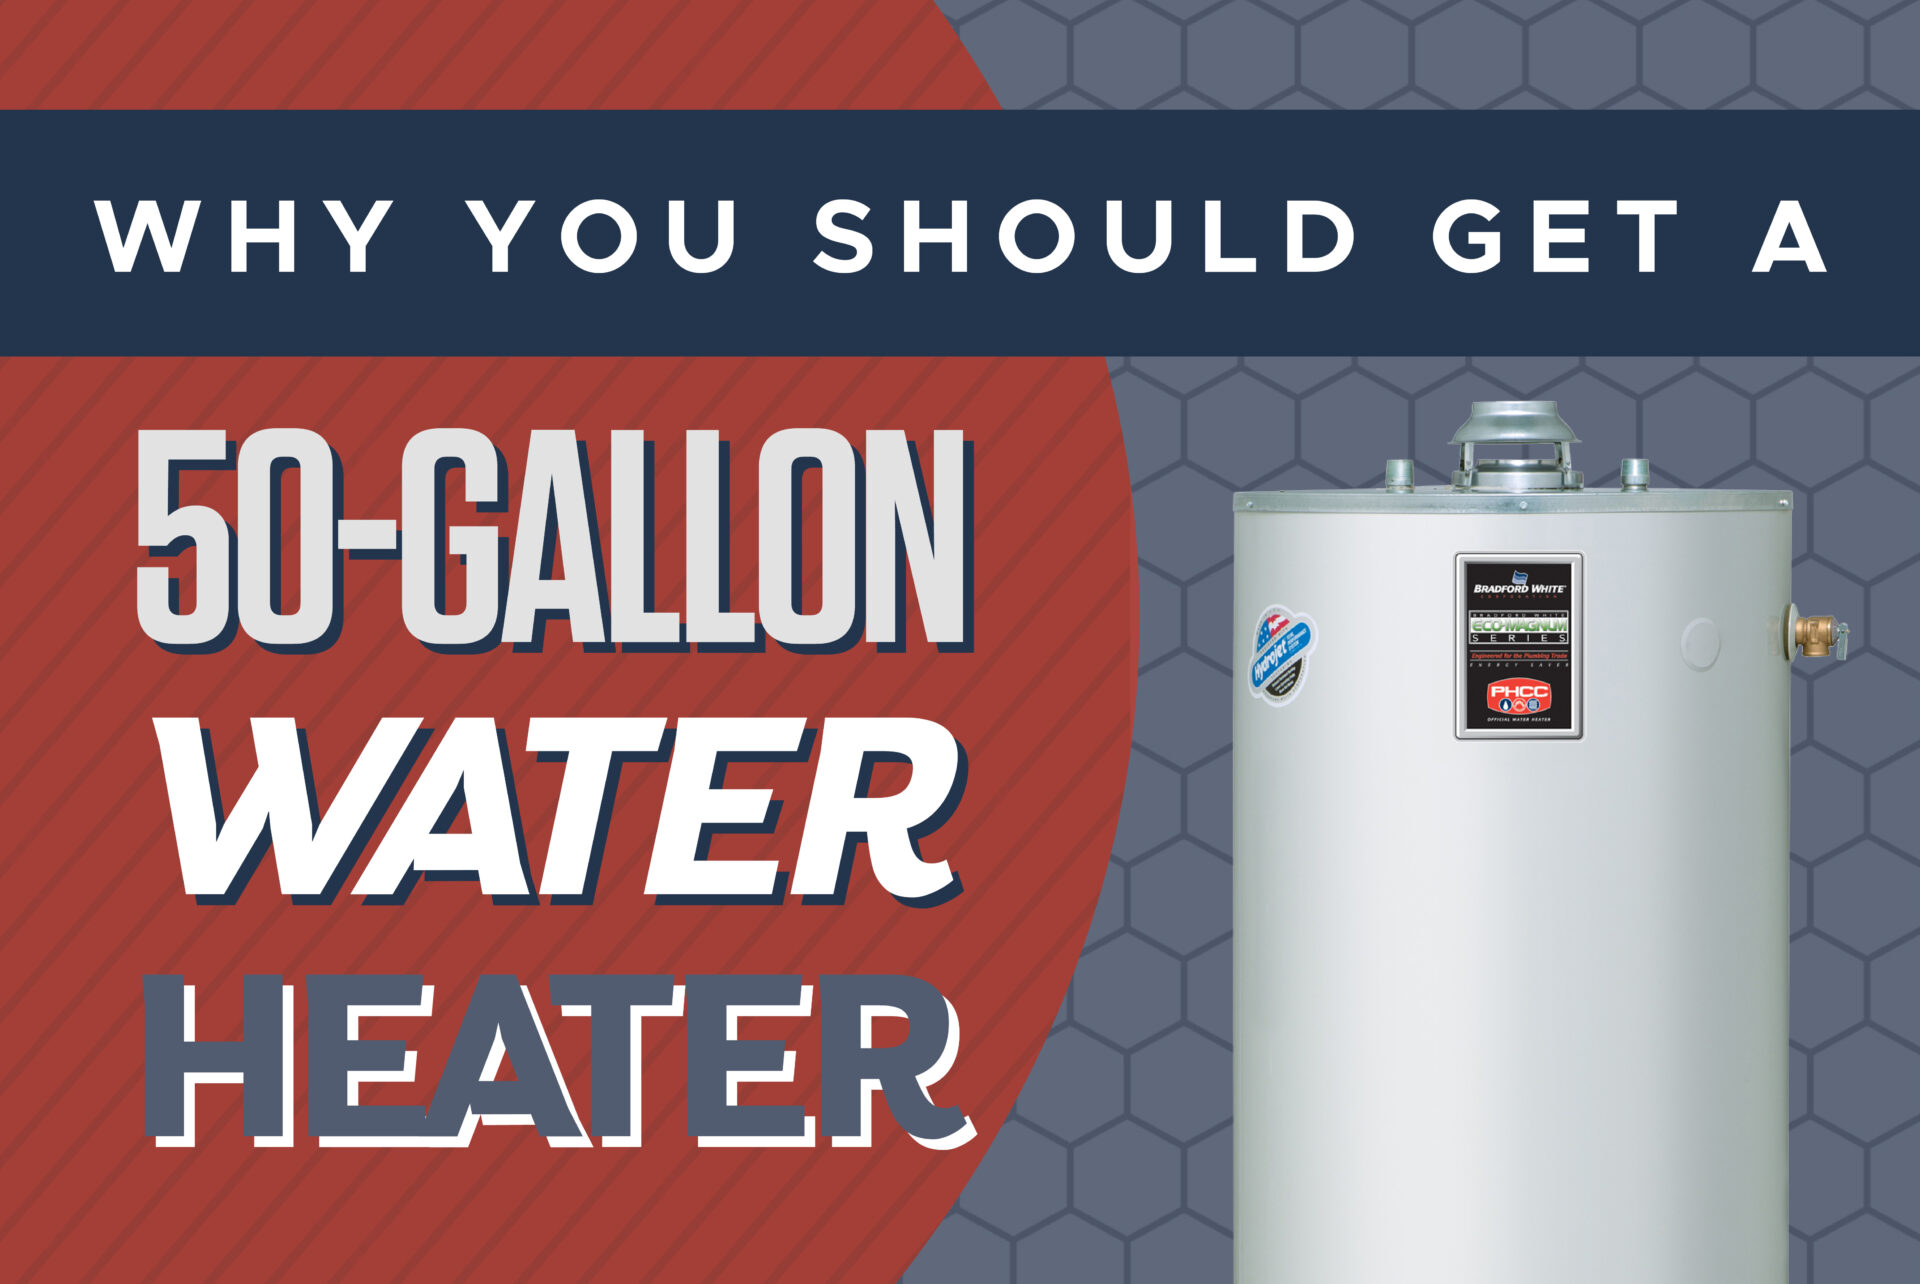 How Much Does A Full 50 Gallon Water Heater Weigh